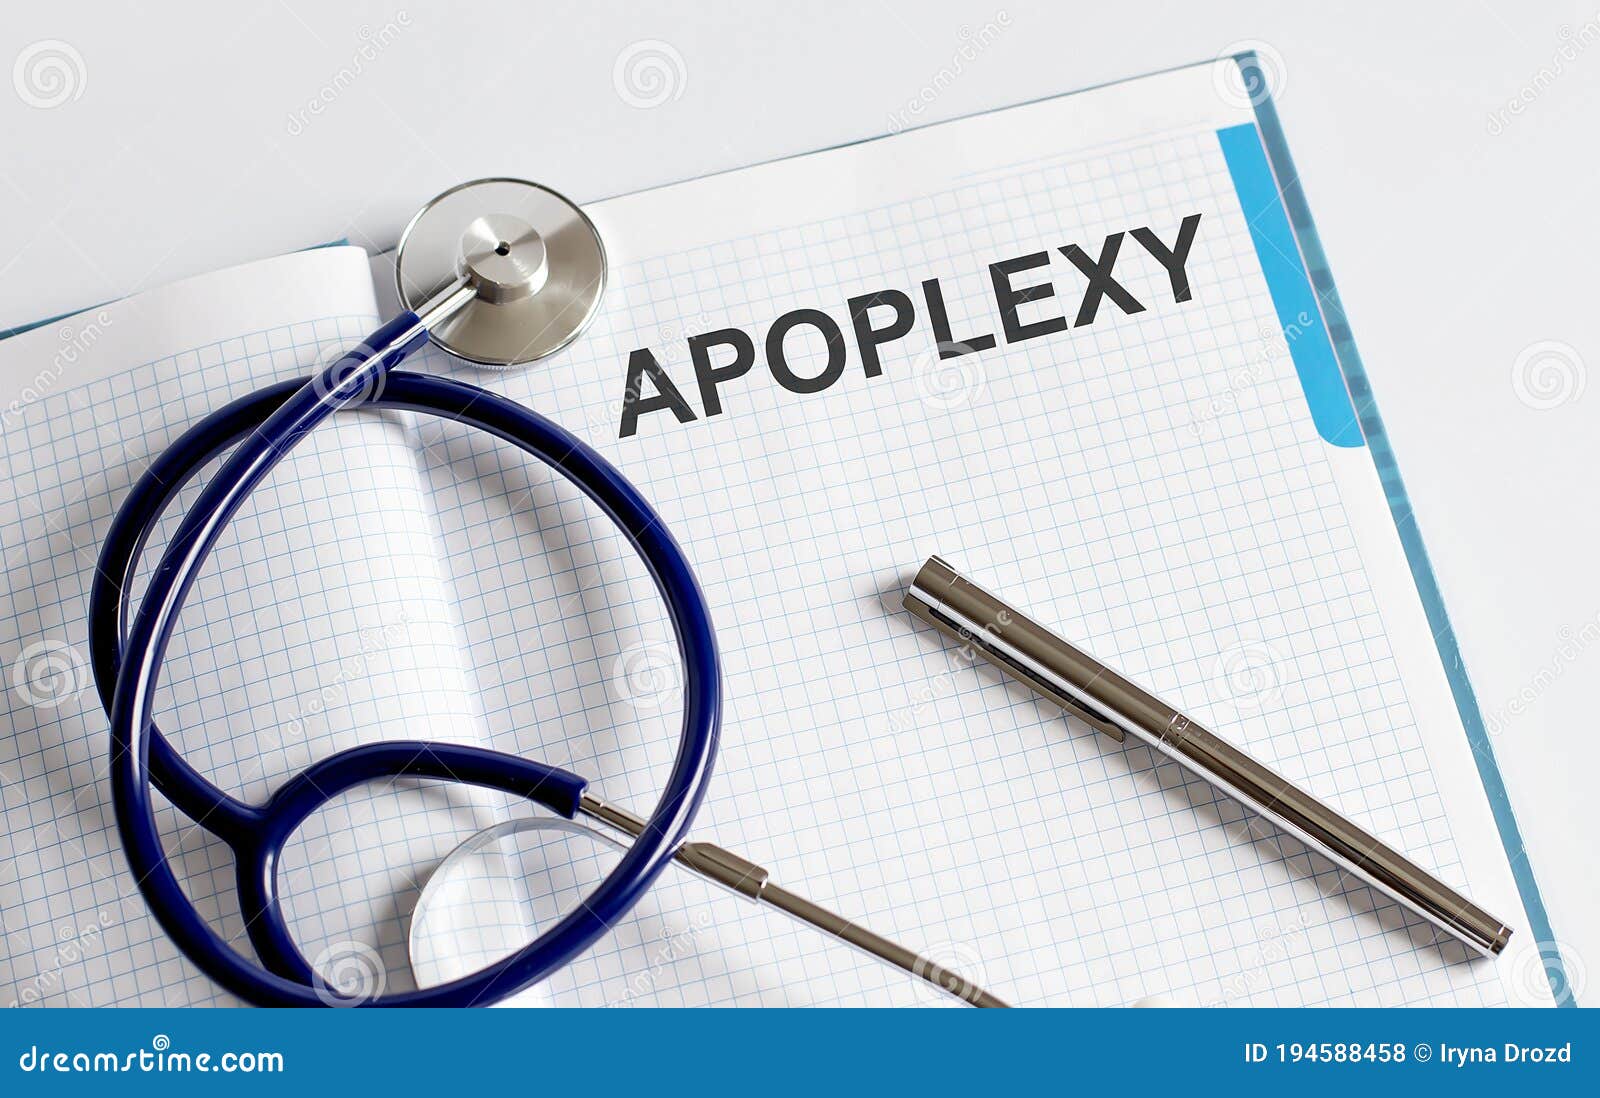 paper with text apoplexy on a table with stethoscope